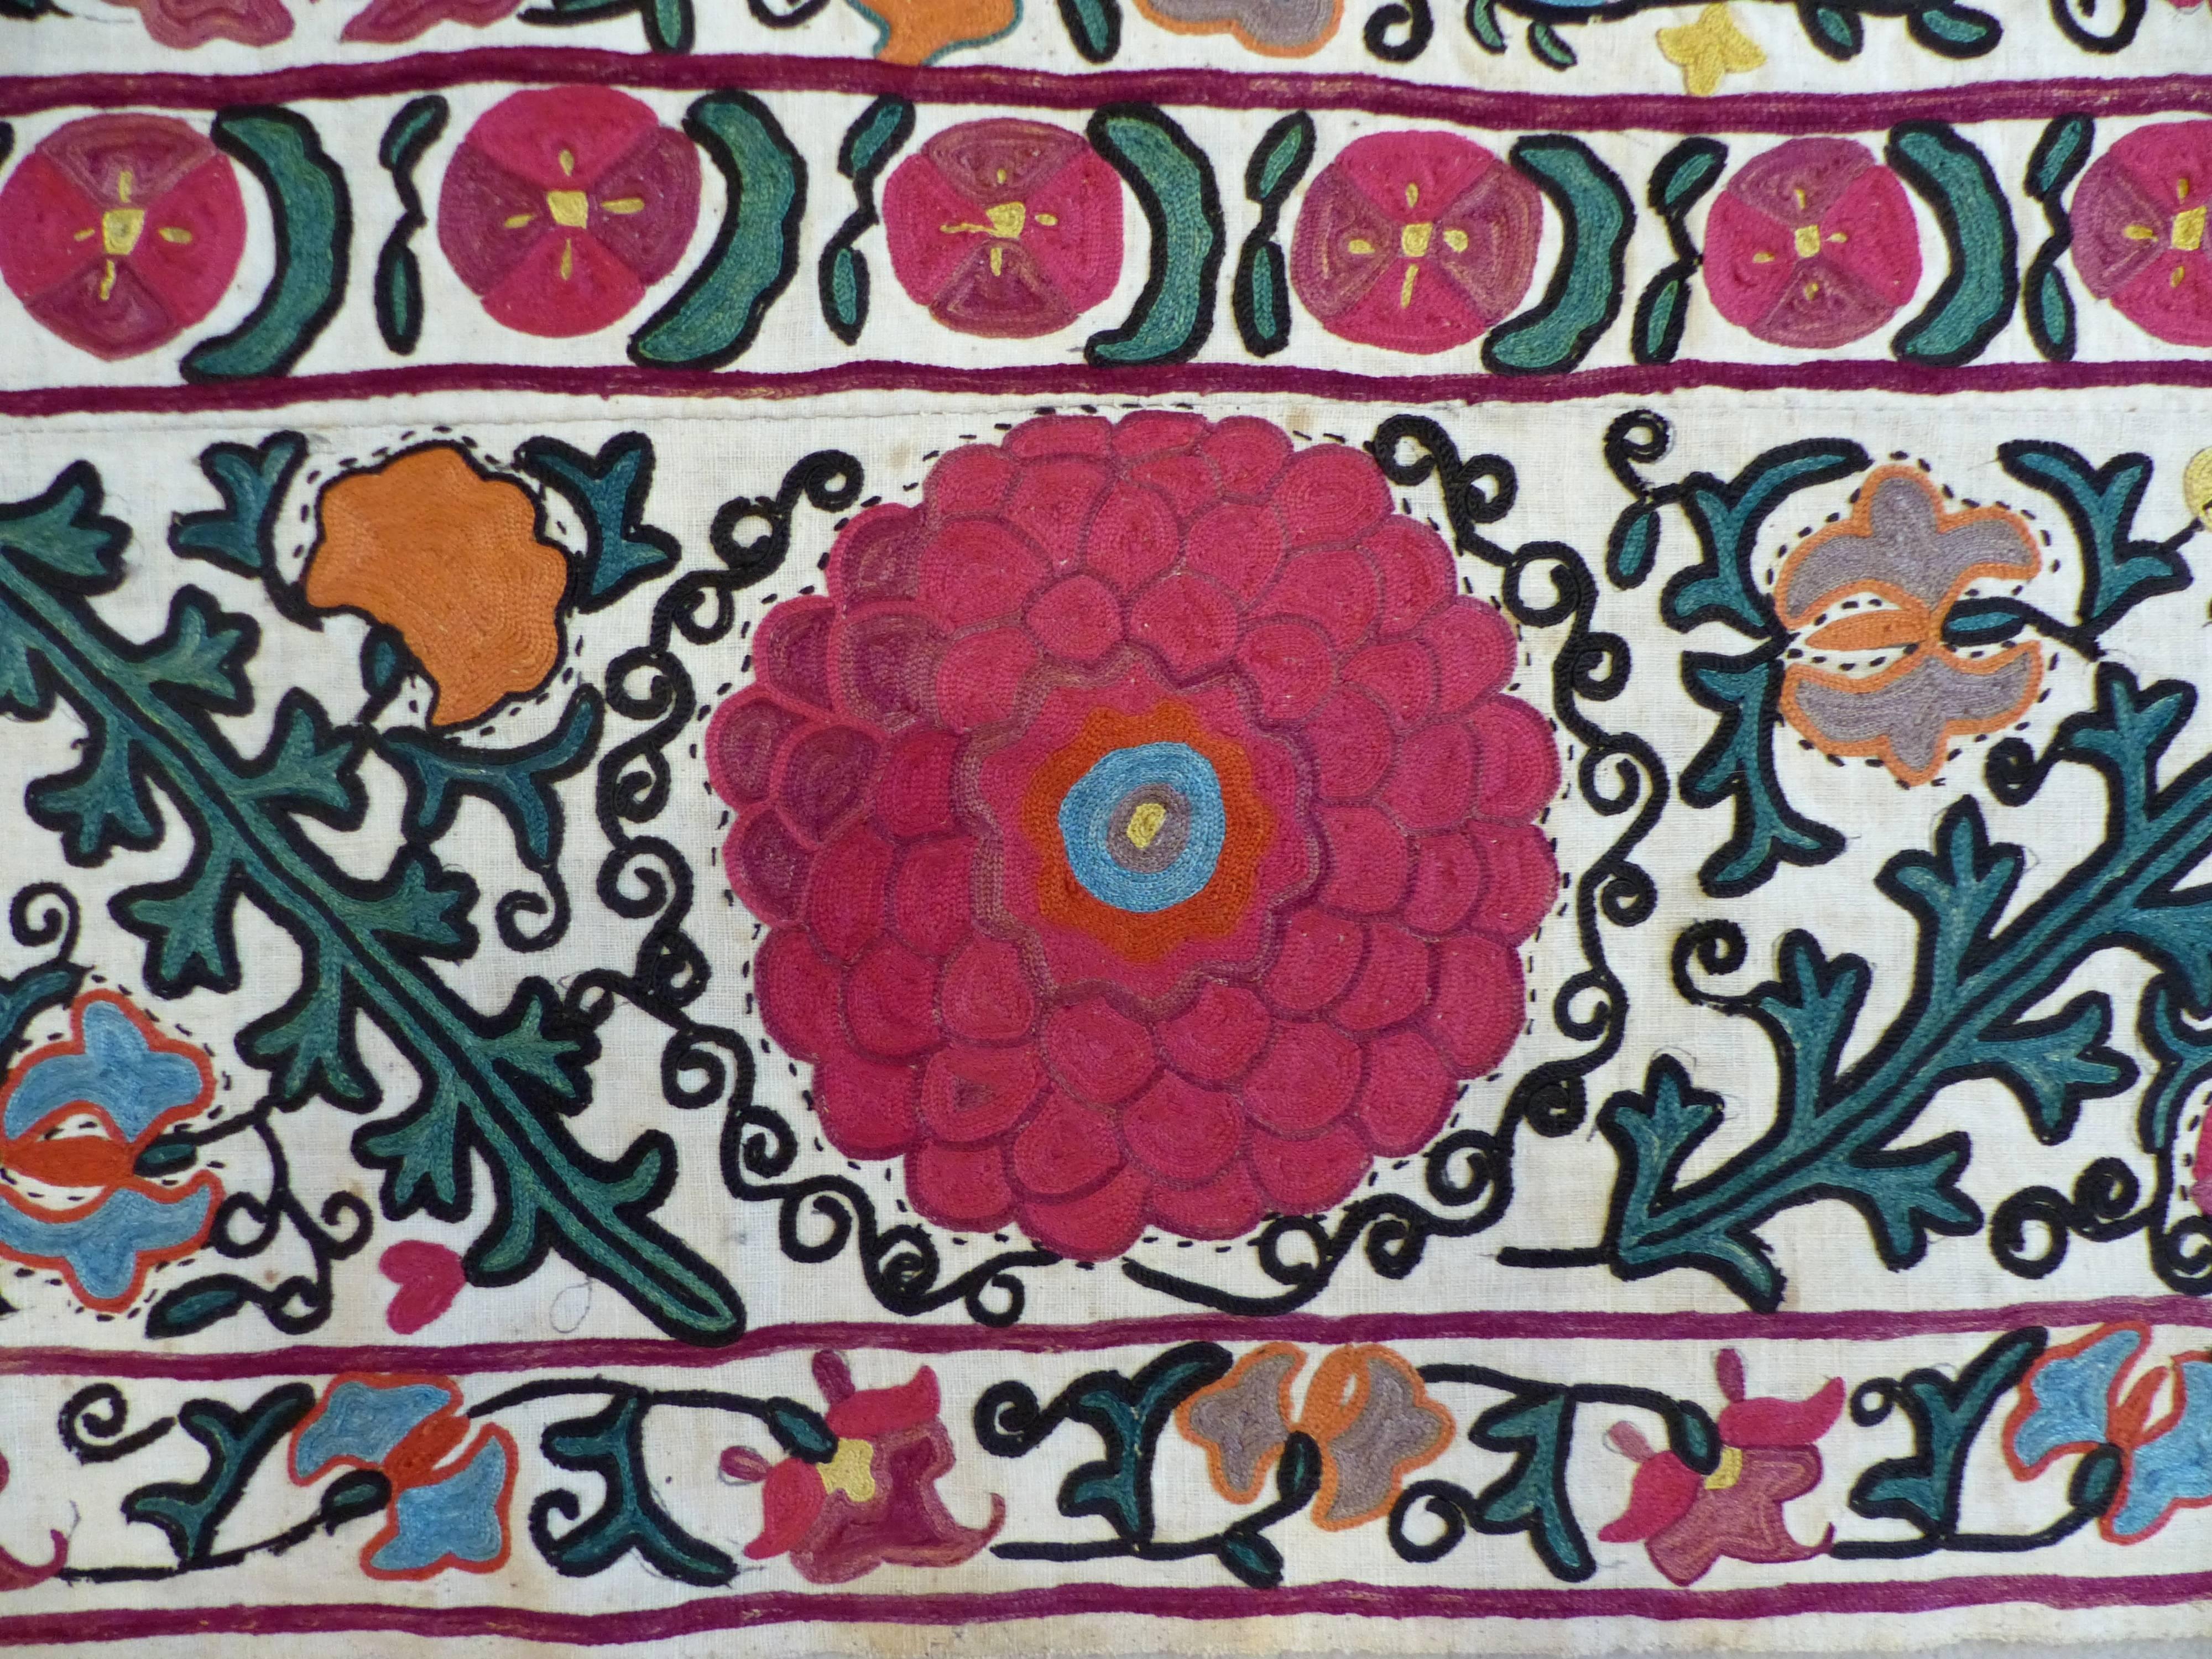 19th Century Suzani Antique Embroidery from Central Asia